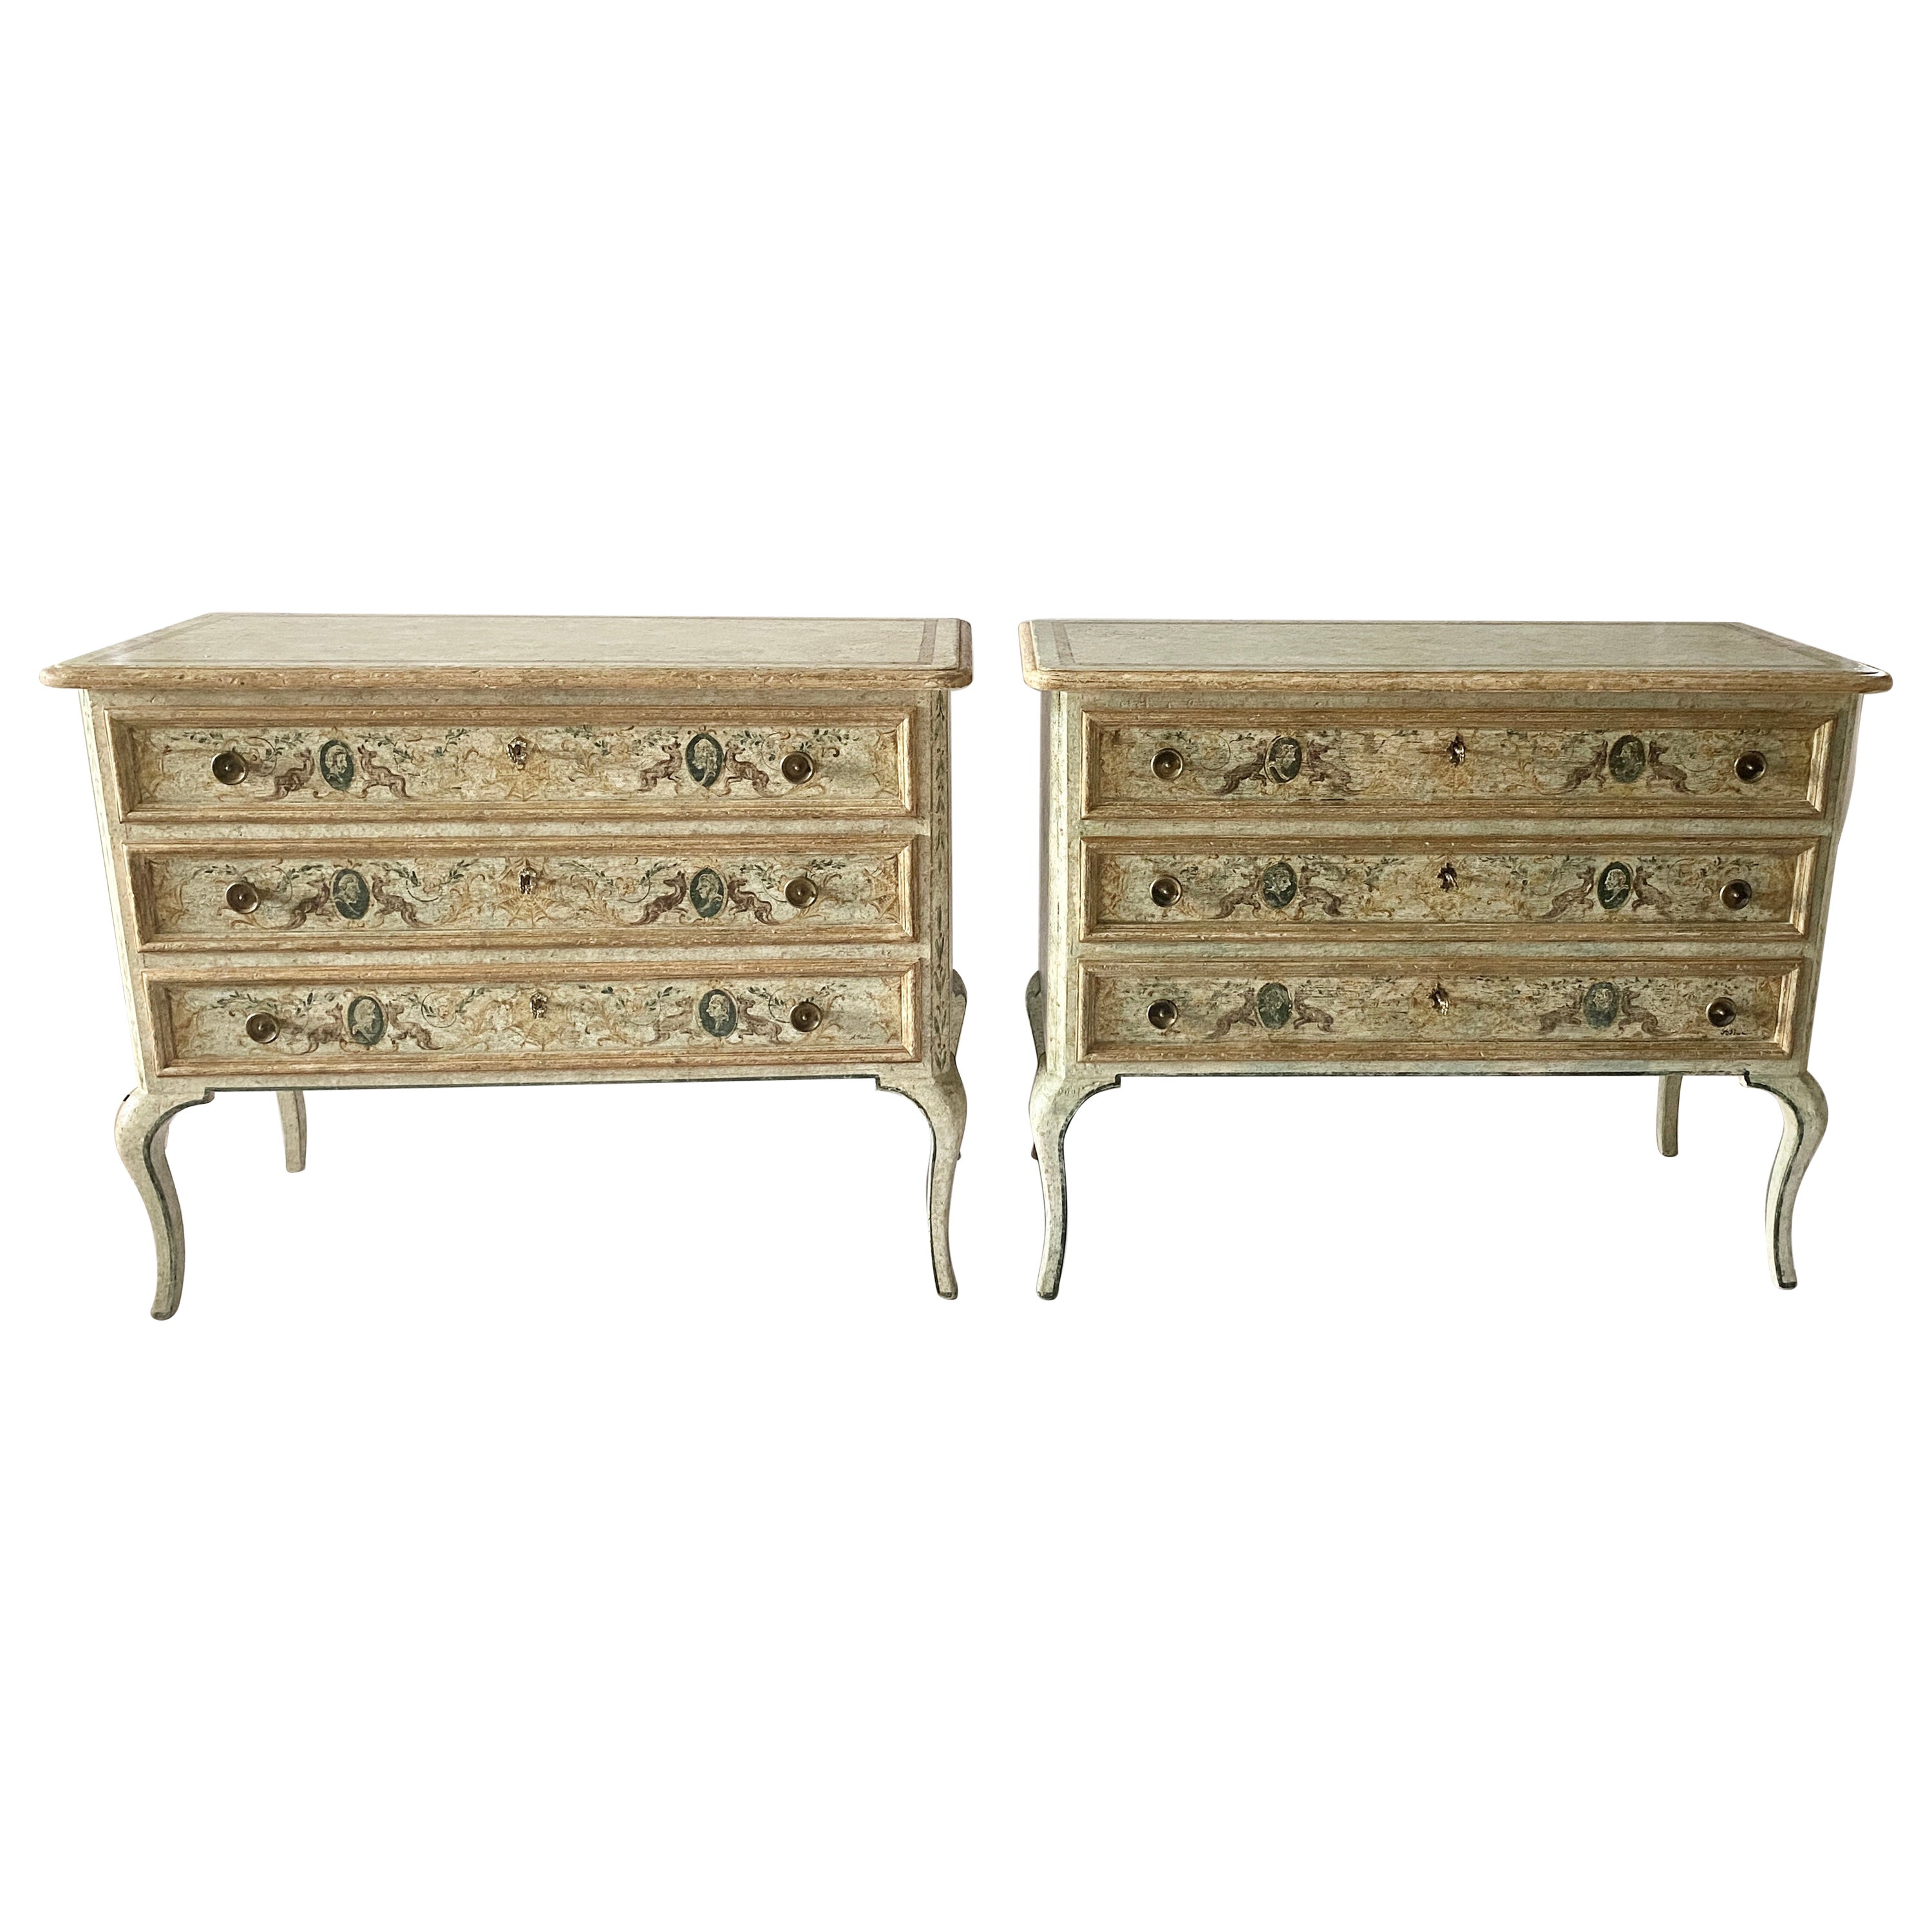 Pair Italian Neoclassical Style Commodes Venetian Hand-Painted Chest of Drawers 